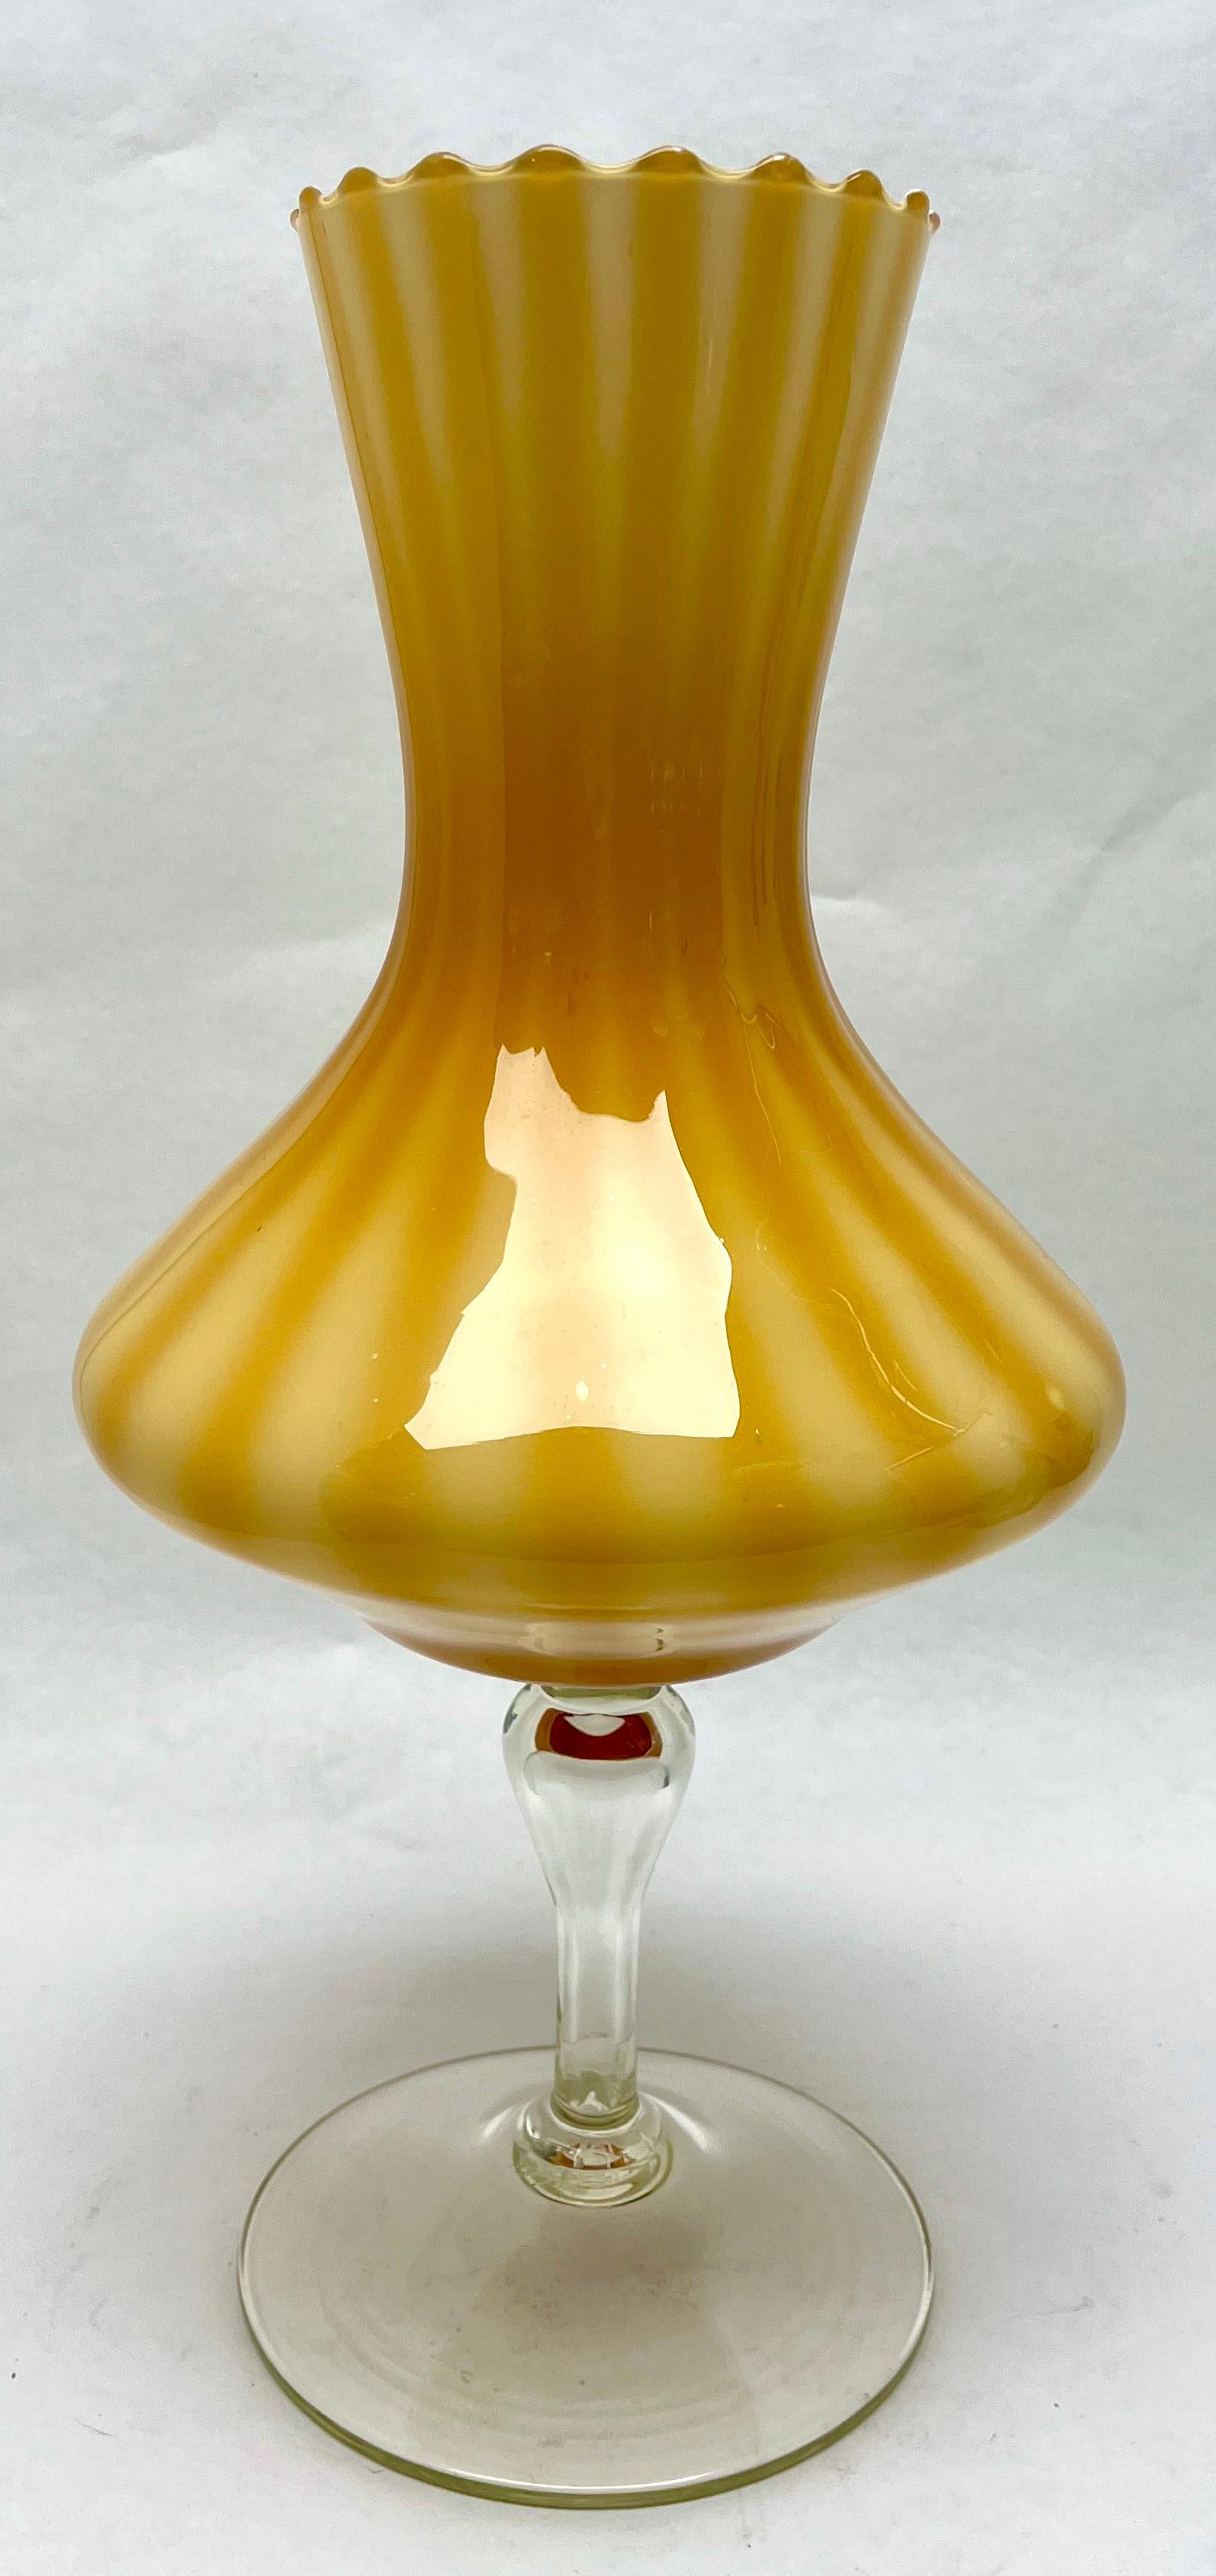 Opaline di Florence (Empoli) opalescent Italian art glass vase the late 1950s or early 1960s. 

Beautiful hand-blown opal and hand-applied white foot
Measures: 44 cm tall, diameter 18 cm
The piece is in excellent condition and a real